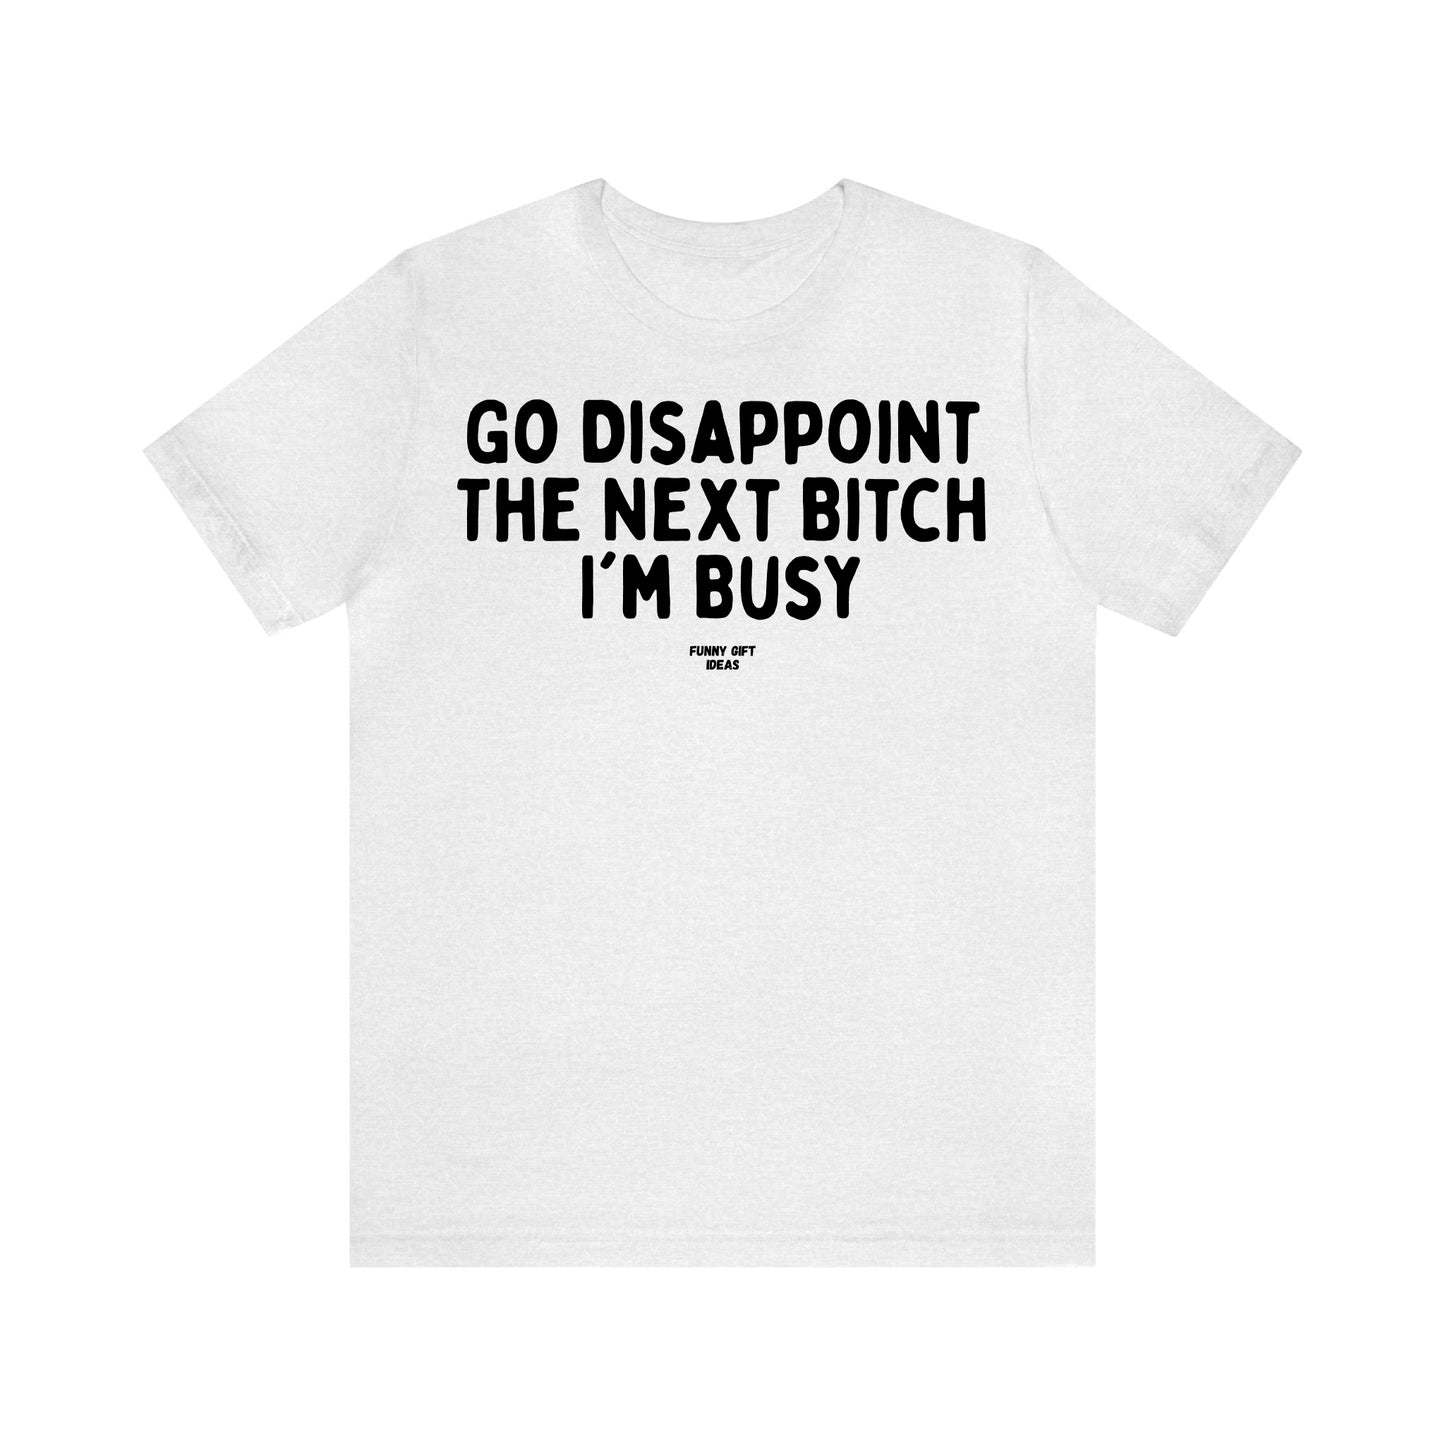 Funny Shirts for Women - Go Disappoint the Next Bitch I'm Busy - Women's T Shirts